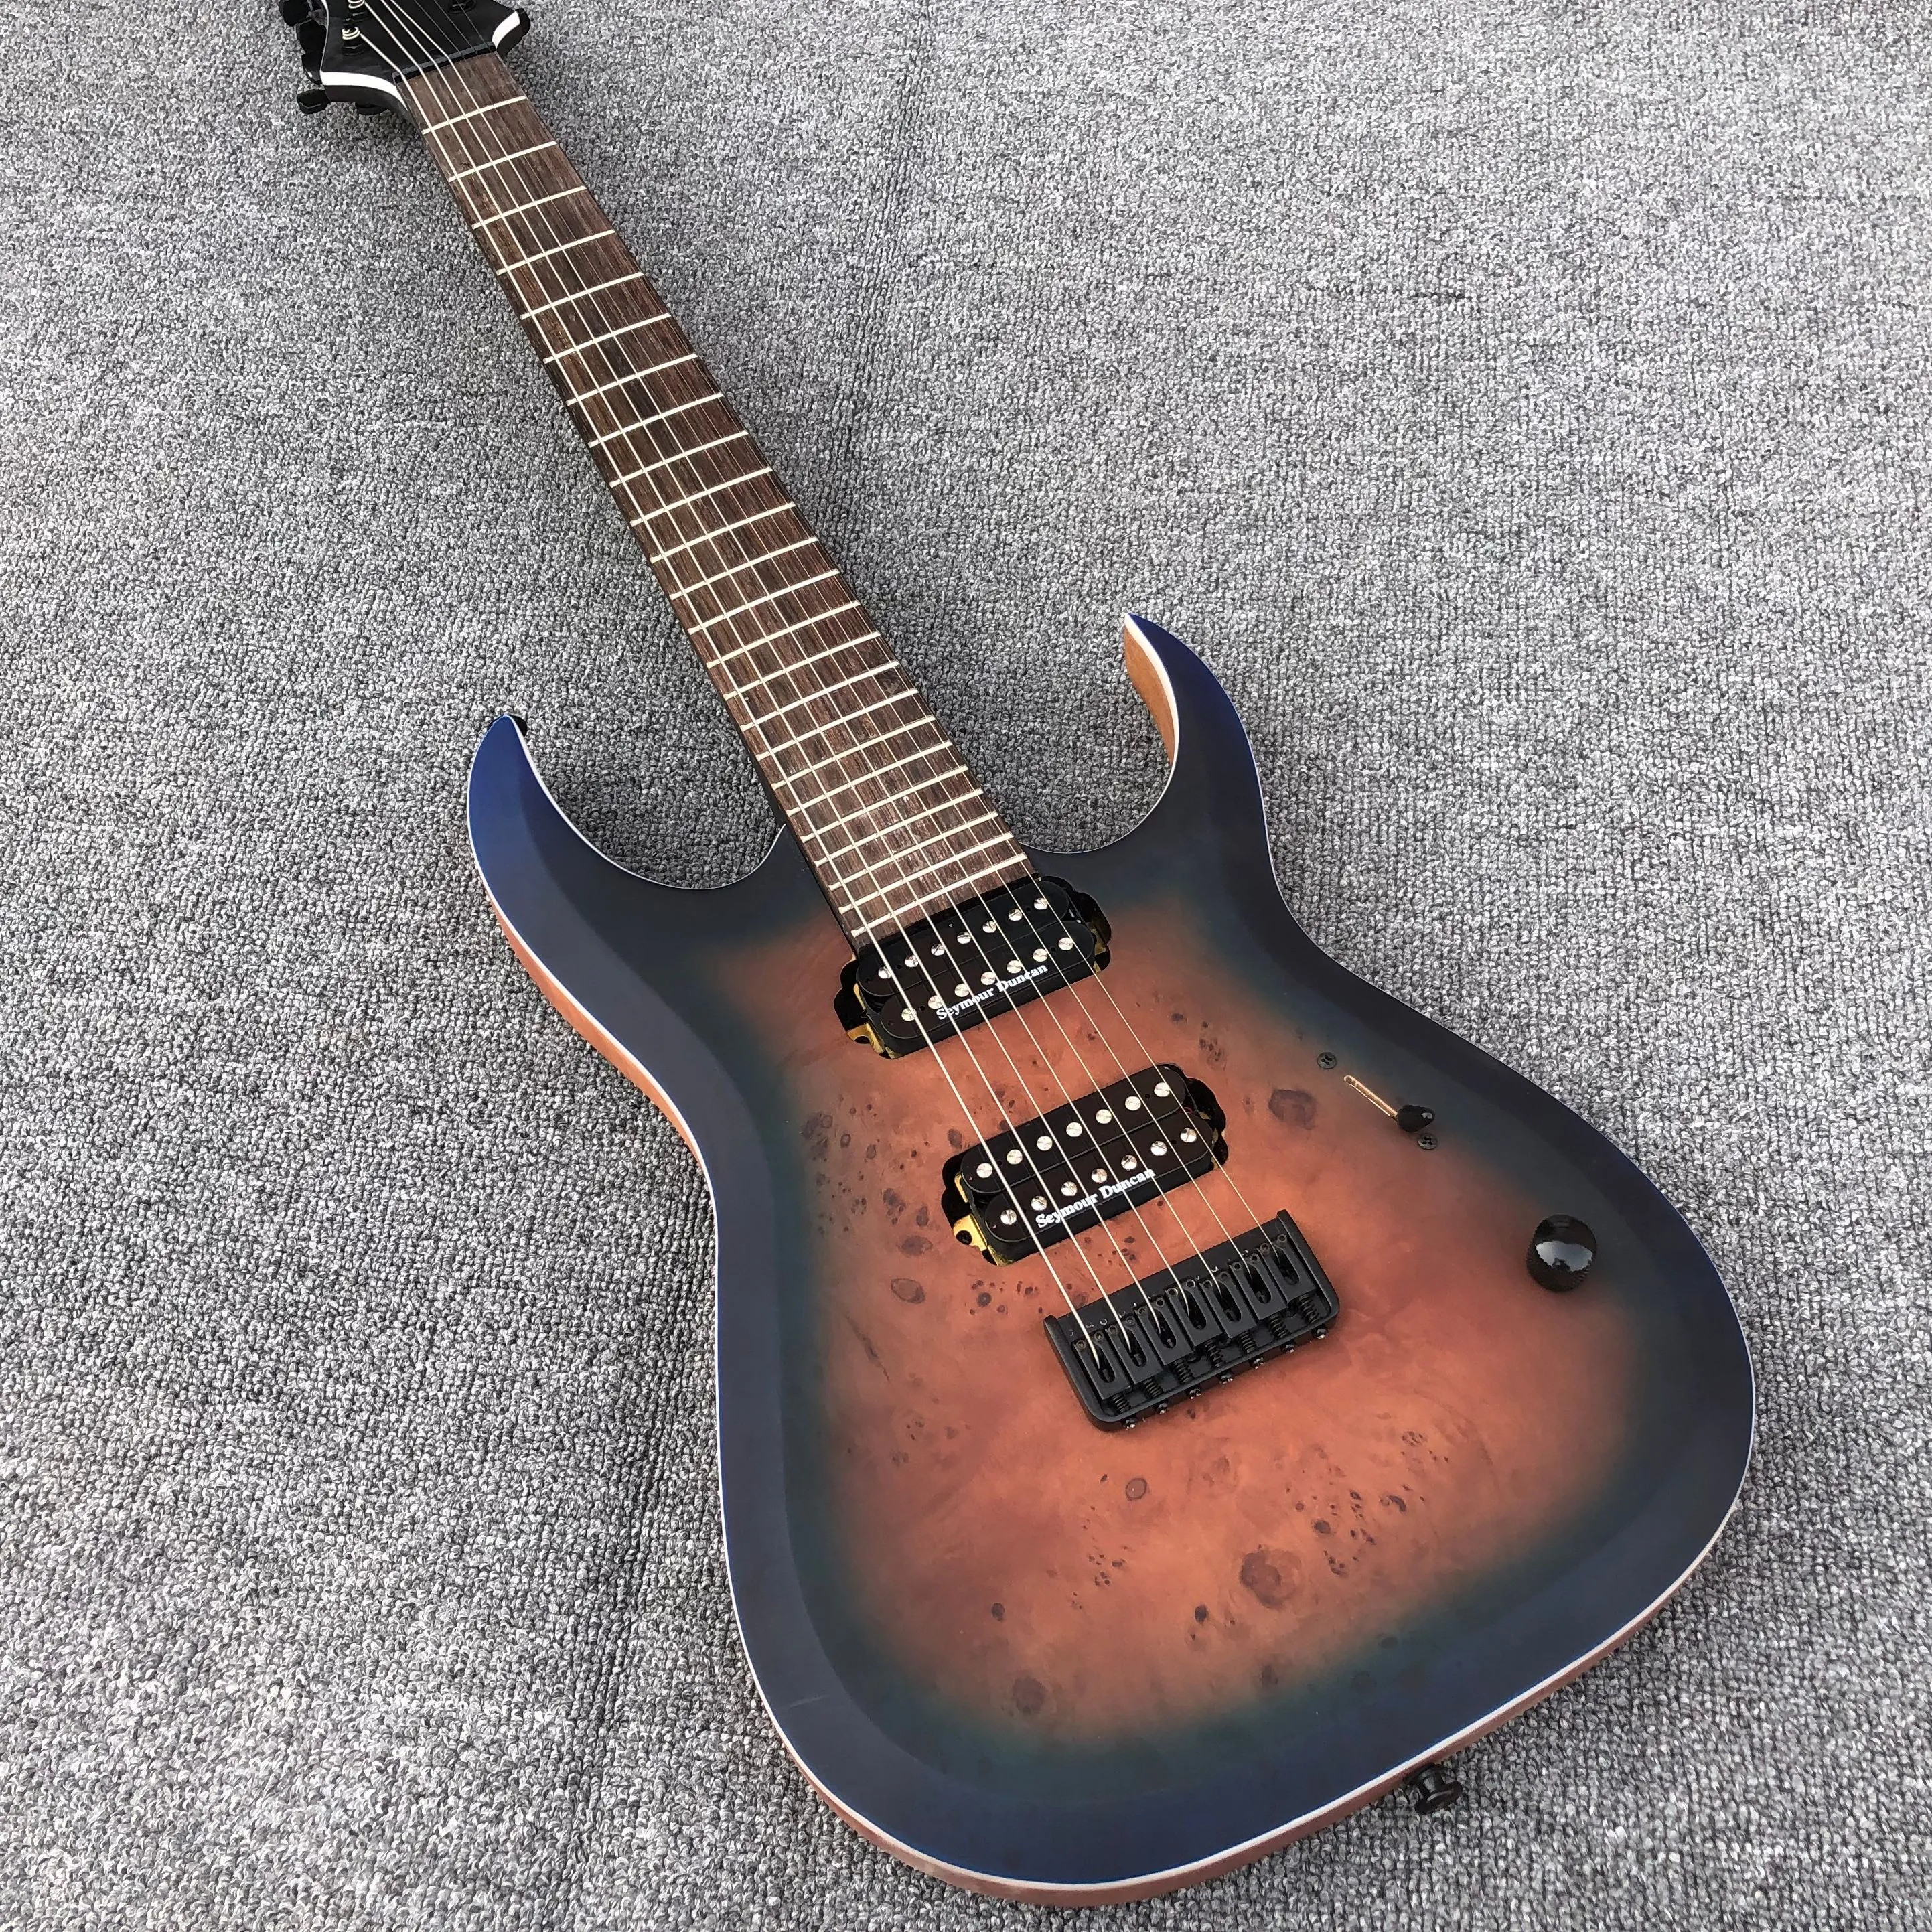 High end custom electric guitar, fade worn, one-piece neck and body inlay, limited time and